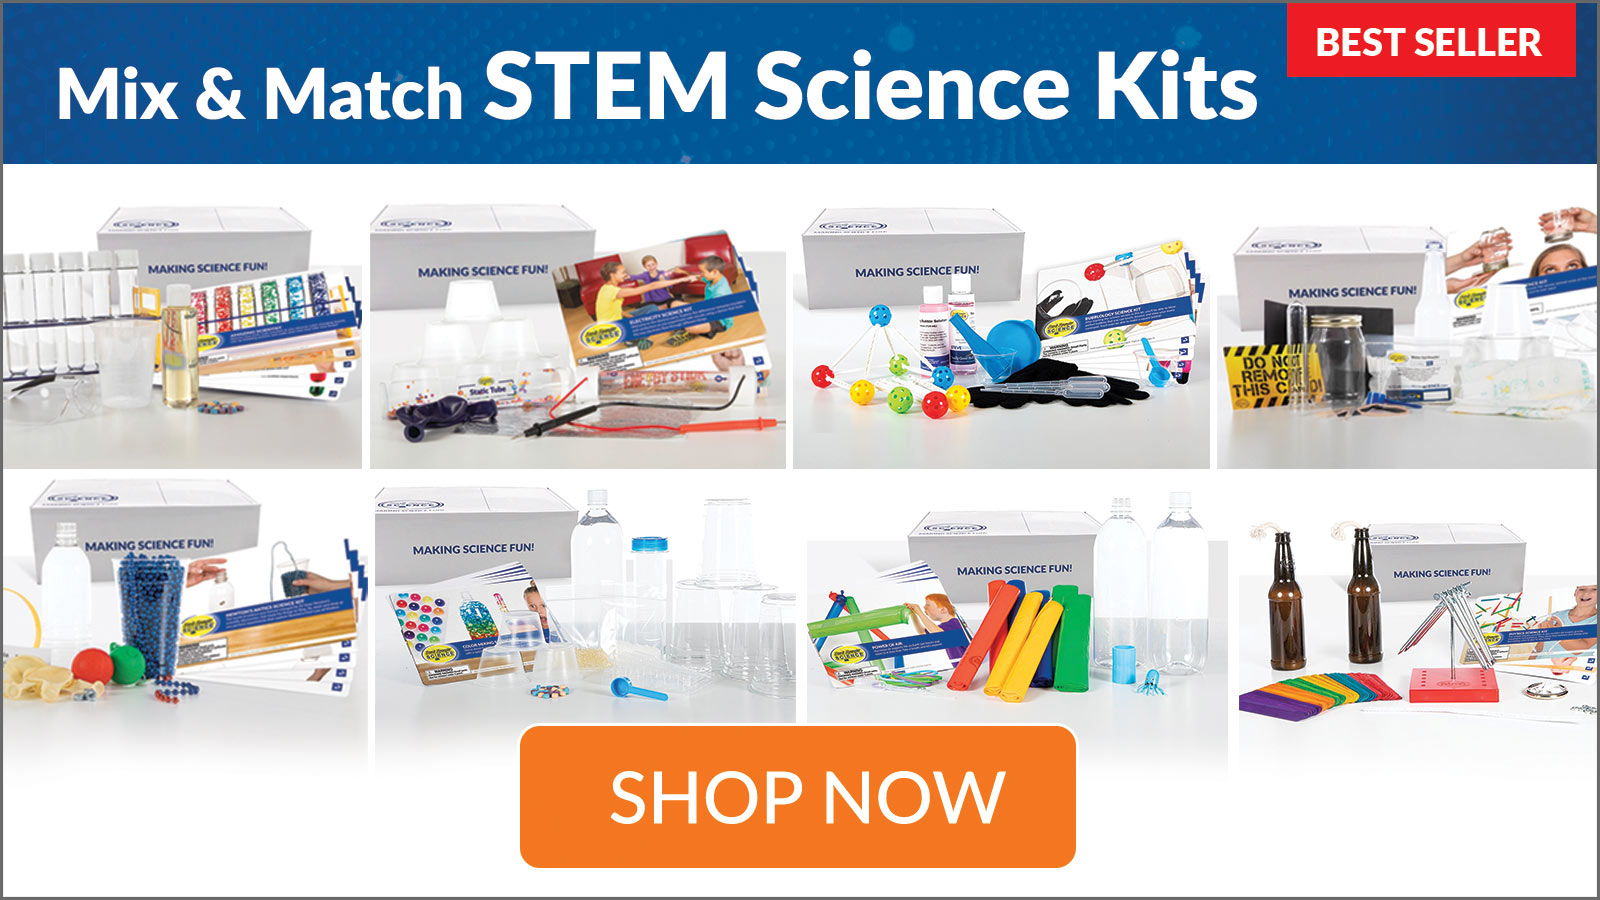 Mix and Match STEM Science Kits